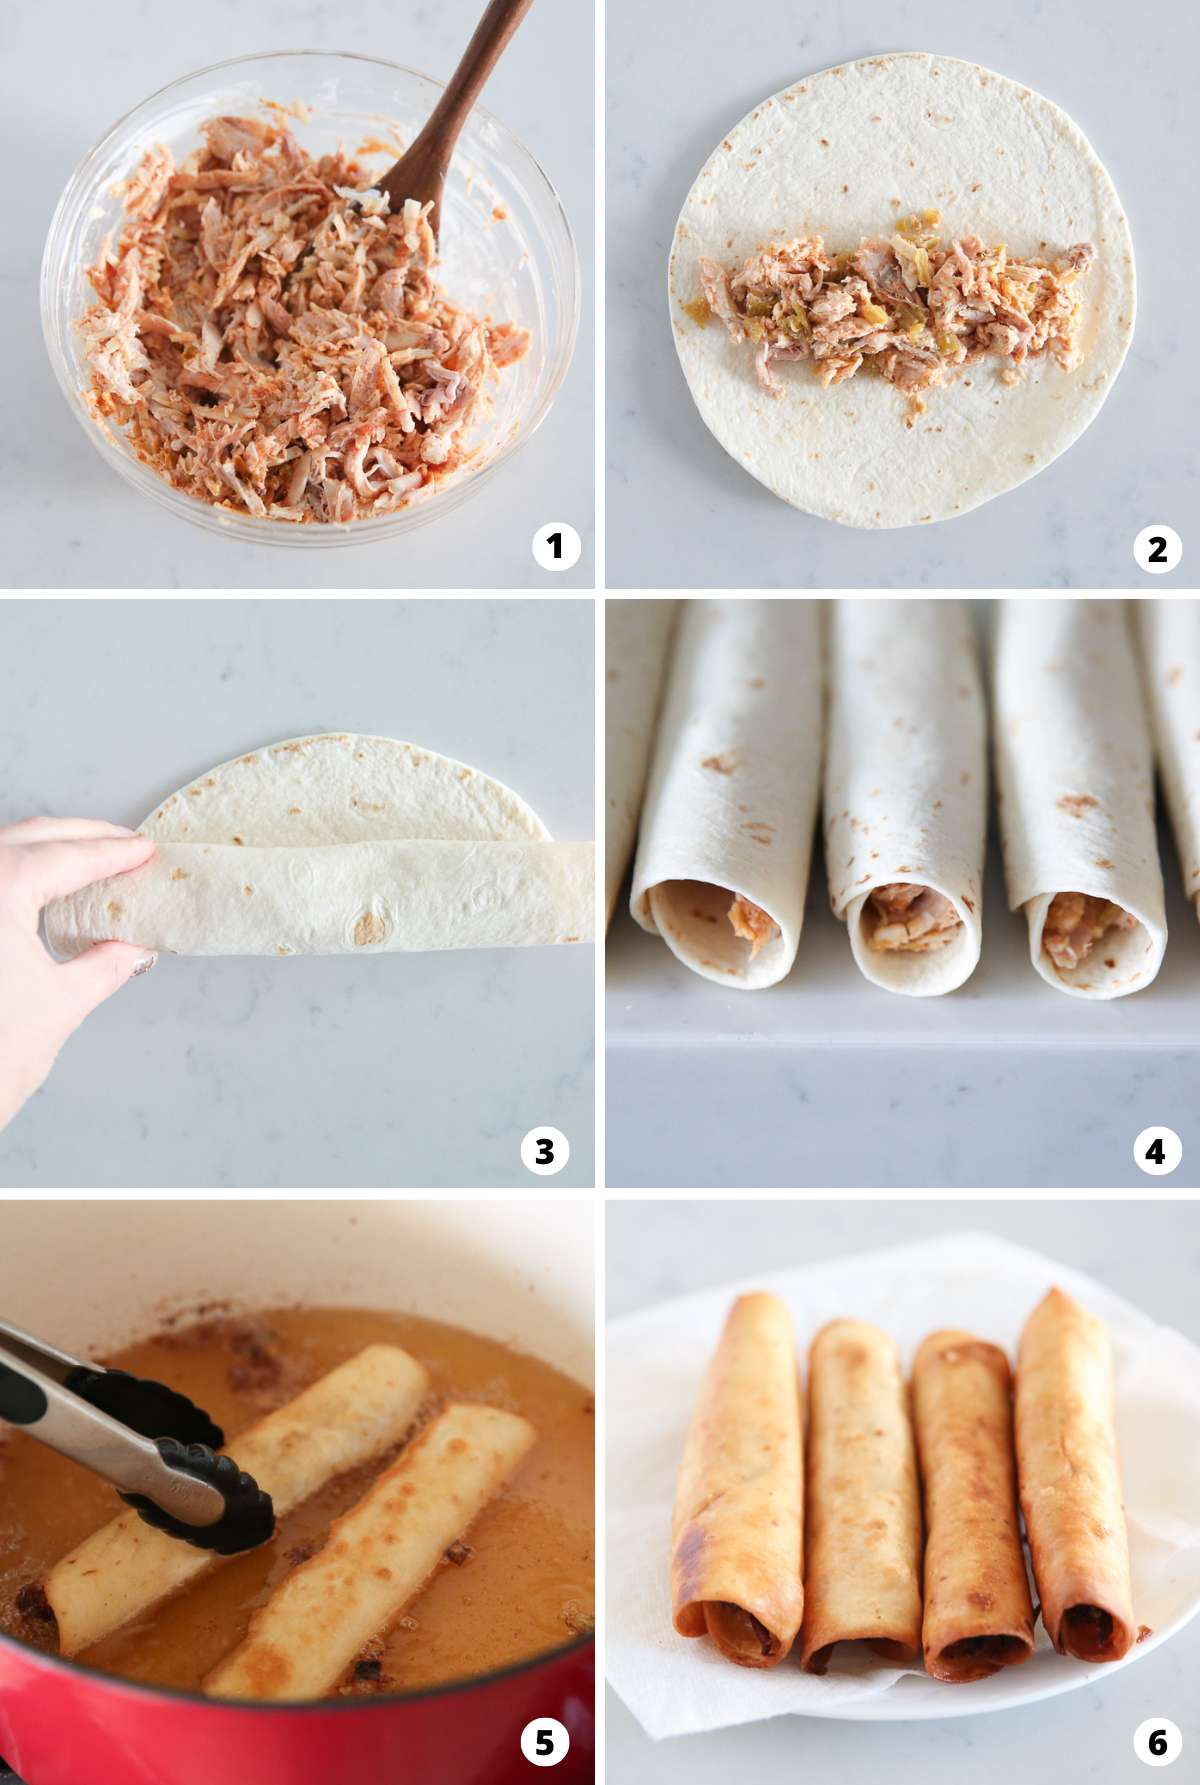 Showing how to make flautas in a 6 step collage.